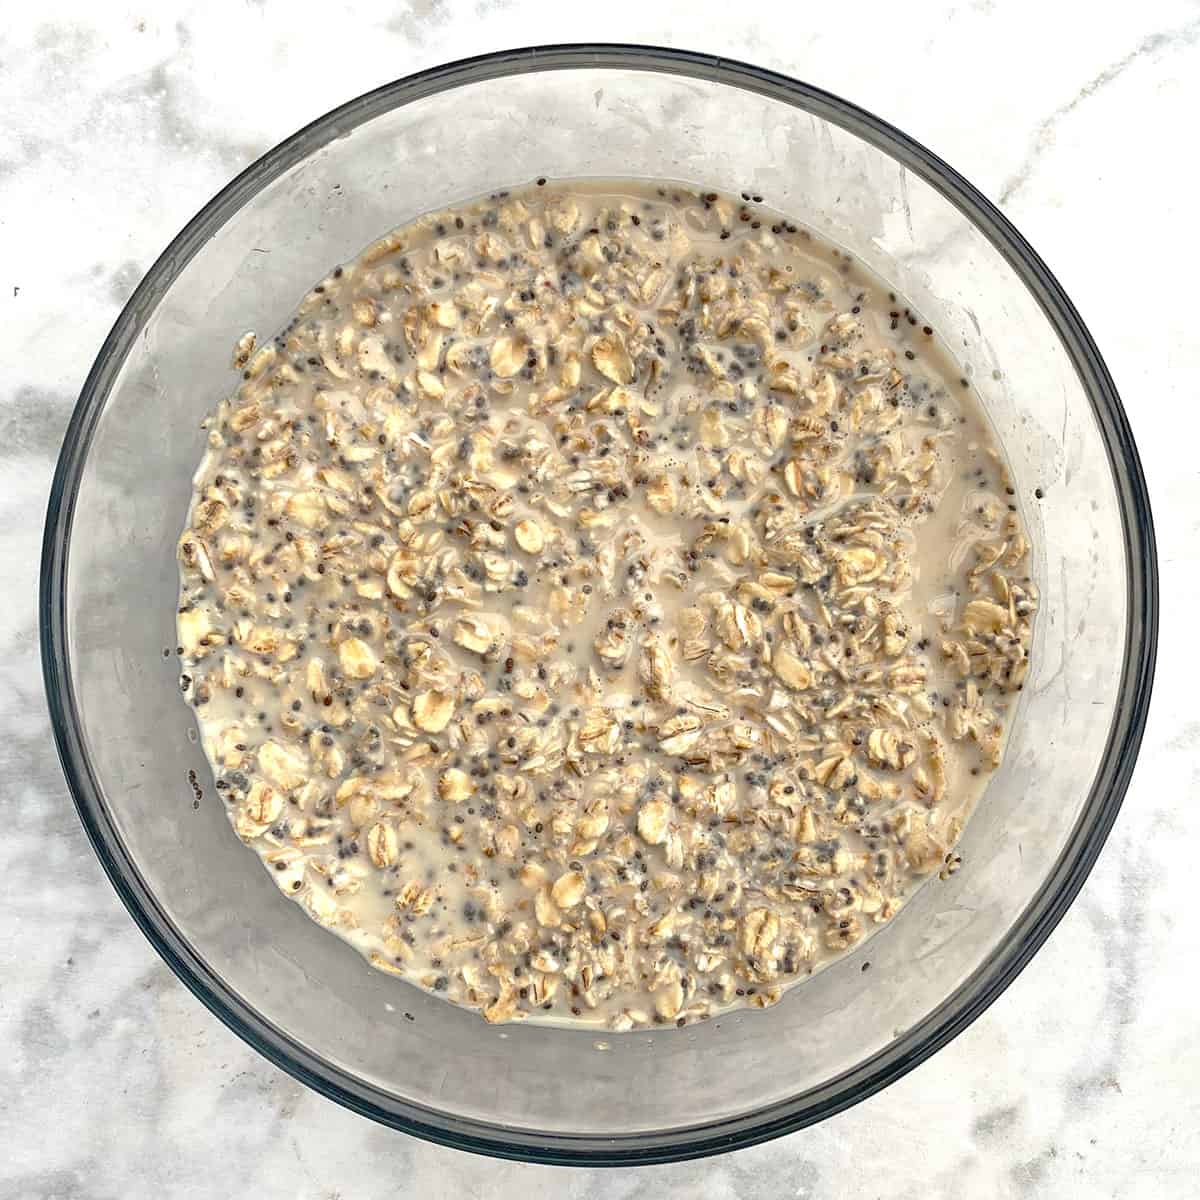 soaking overnight oats, milk, and chia seeds in glass jar.